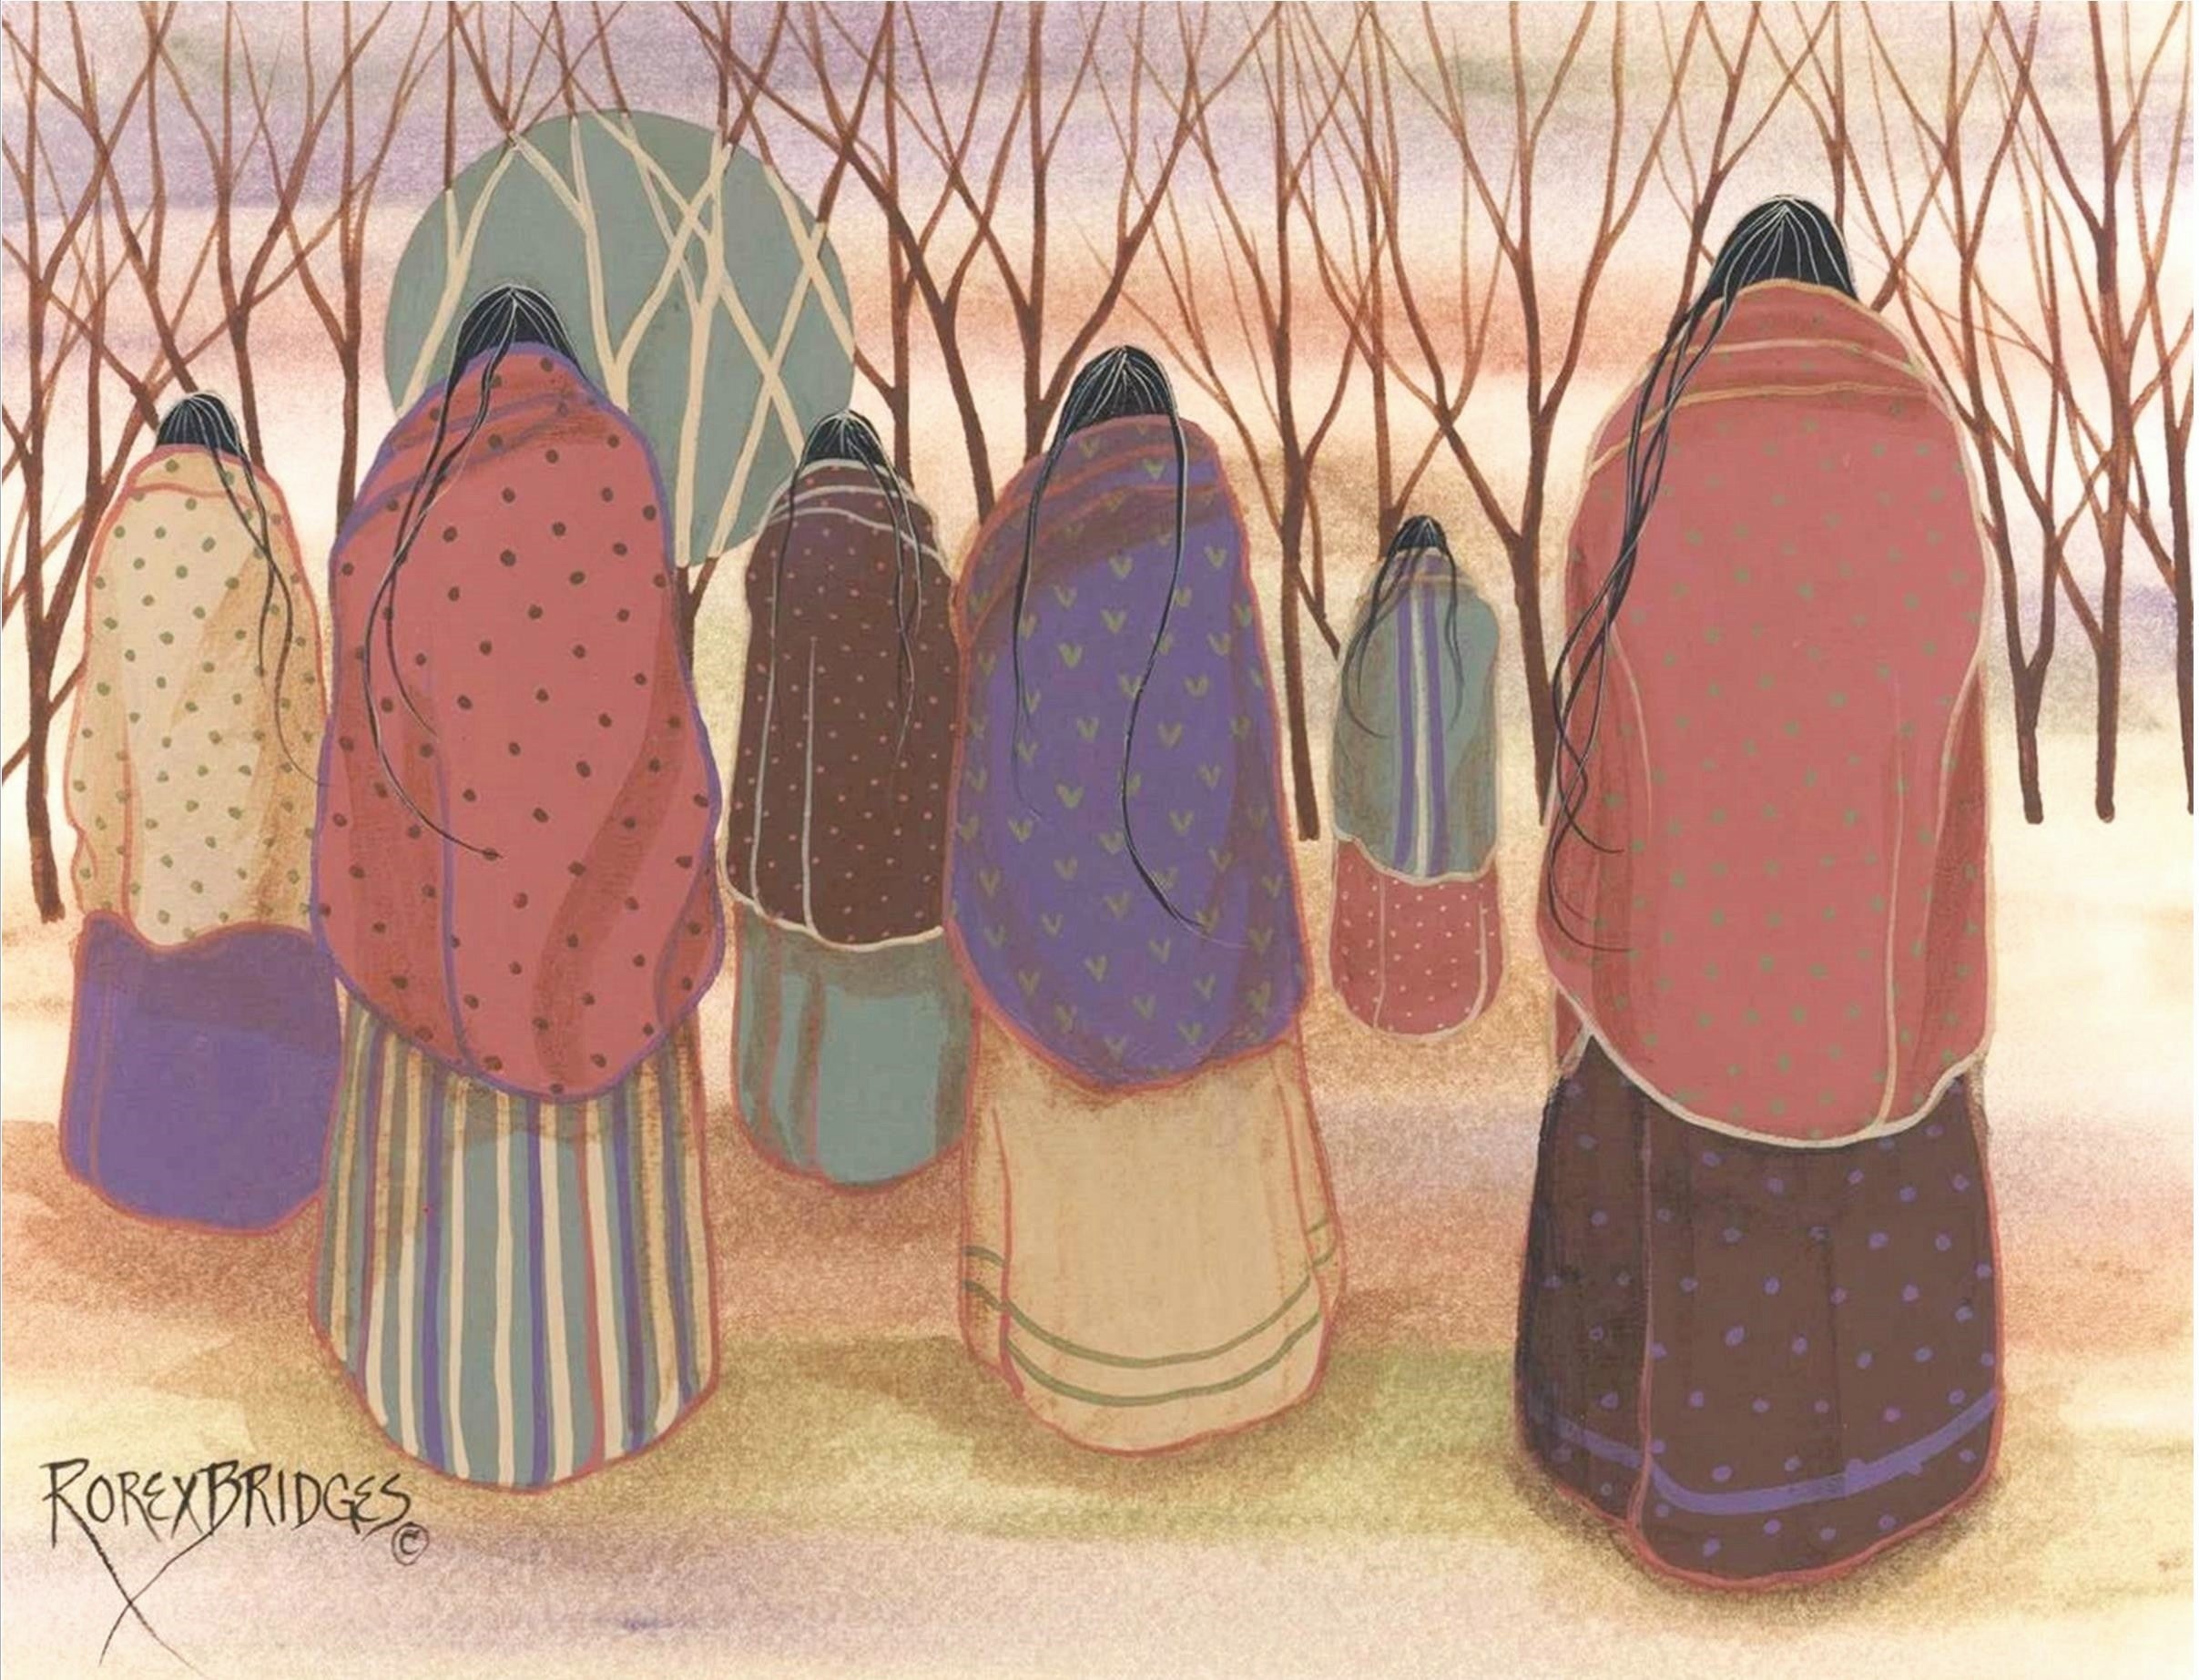 Six tribal women in brightly colored blankets walking toward the woods 